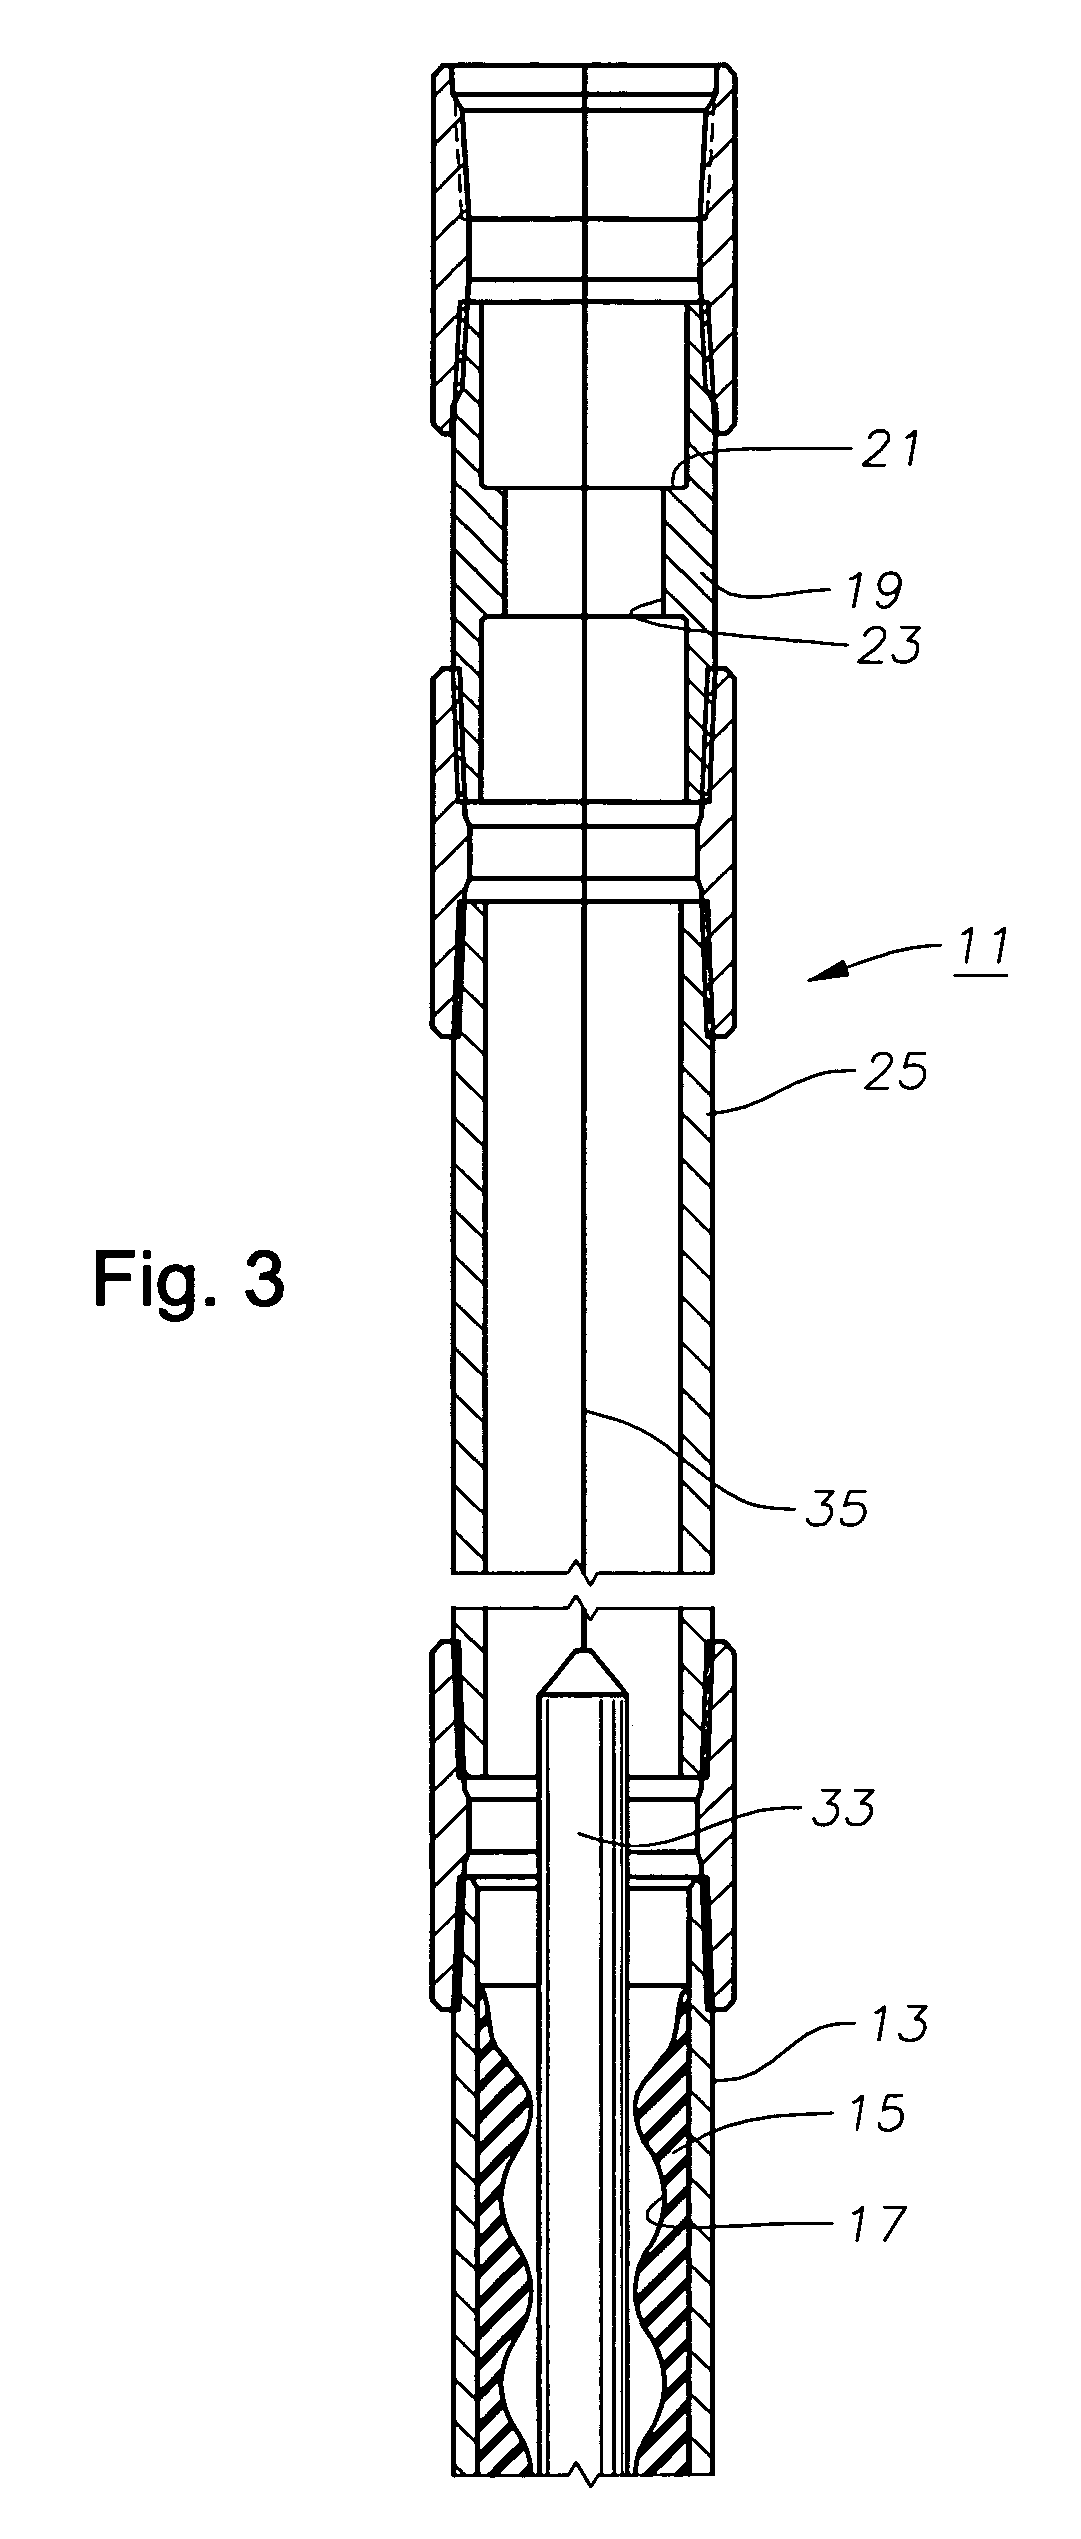 Method and apparatus for aligning rotor in stator of a rod driven well pump